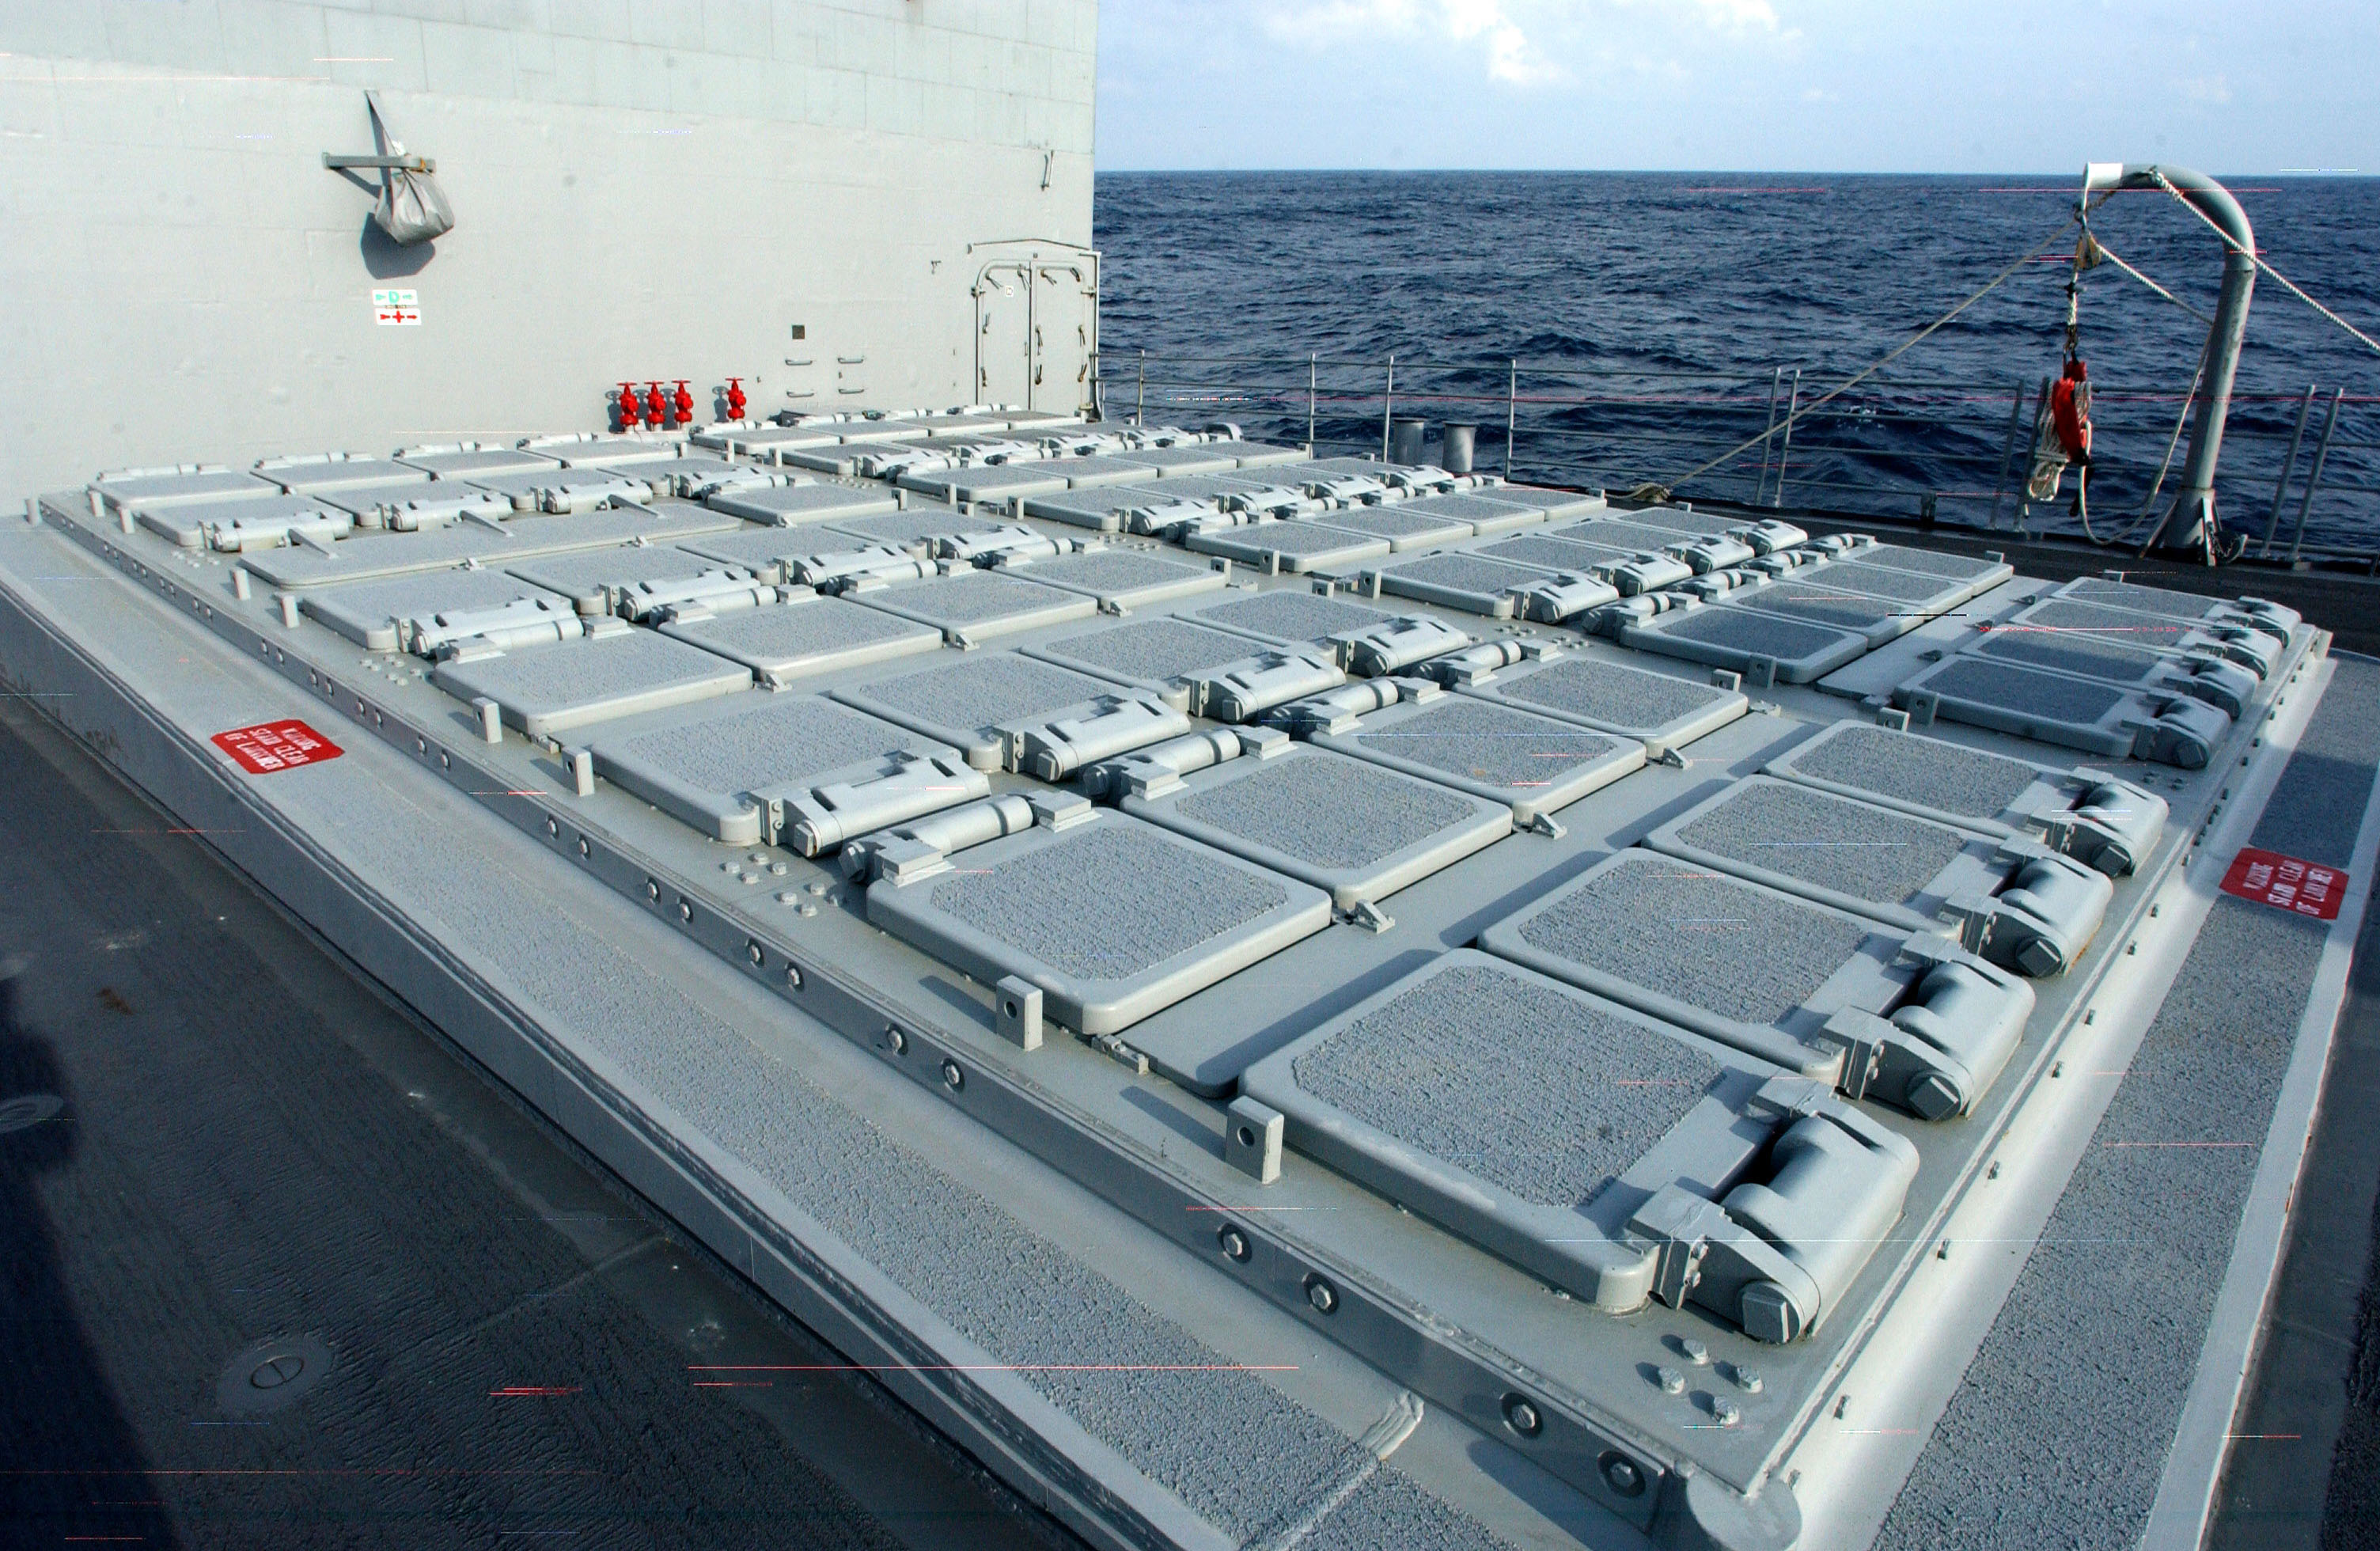 US_Navy_030303-N-3235P-503_A_topside_view_of_the_forward_MK-41_Vertical_Launching_System_(VLS)_aboard_the_guided_missile_cruiser_USS_San_Jacinto_(CG_56).jpg